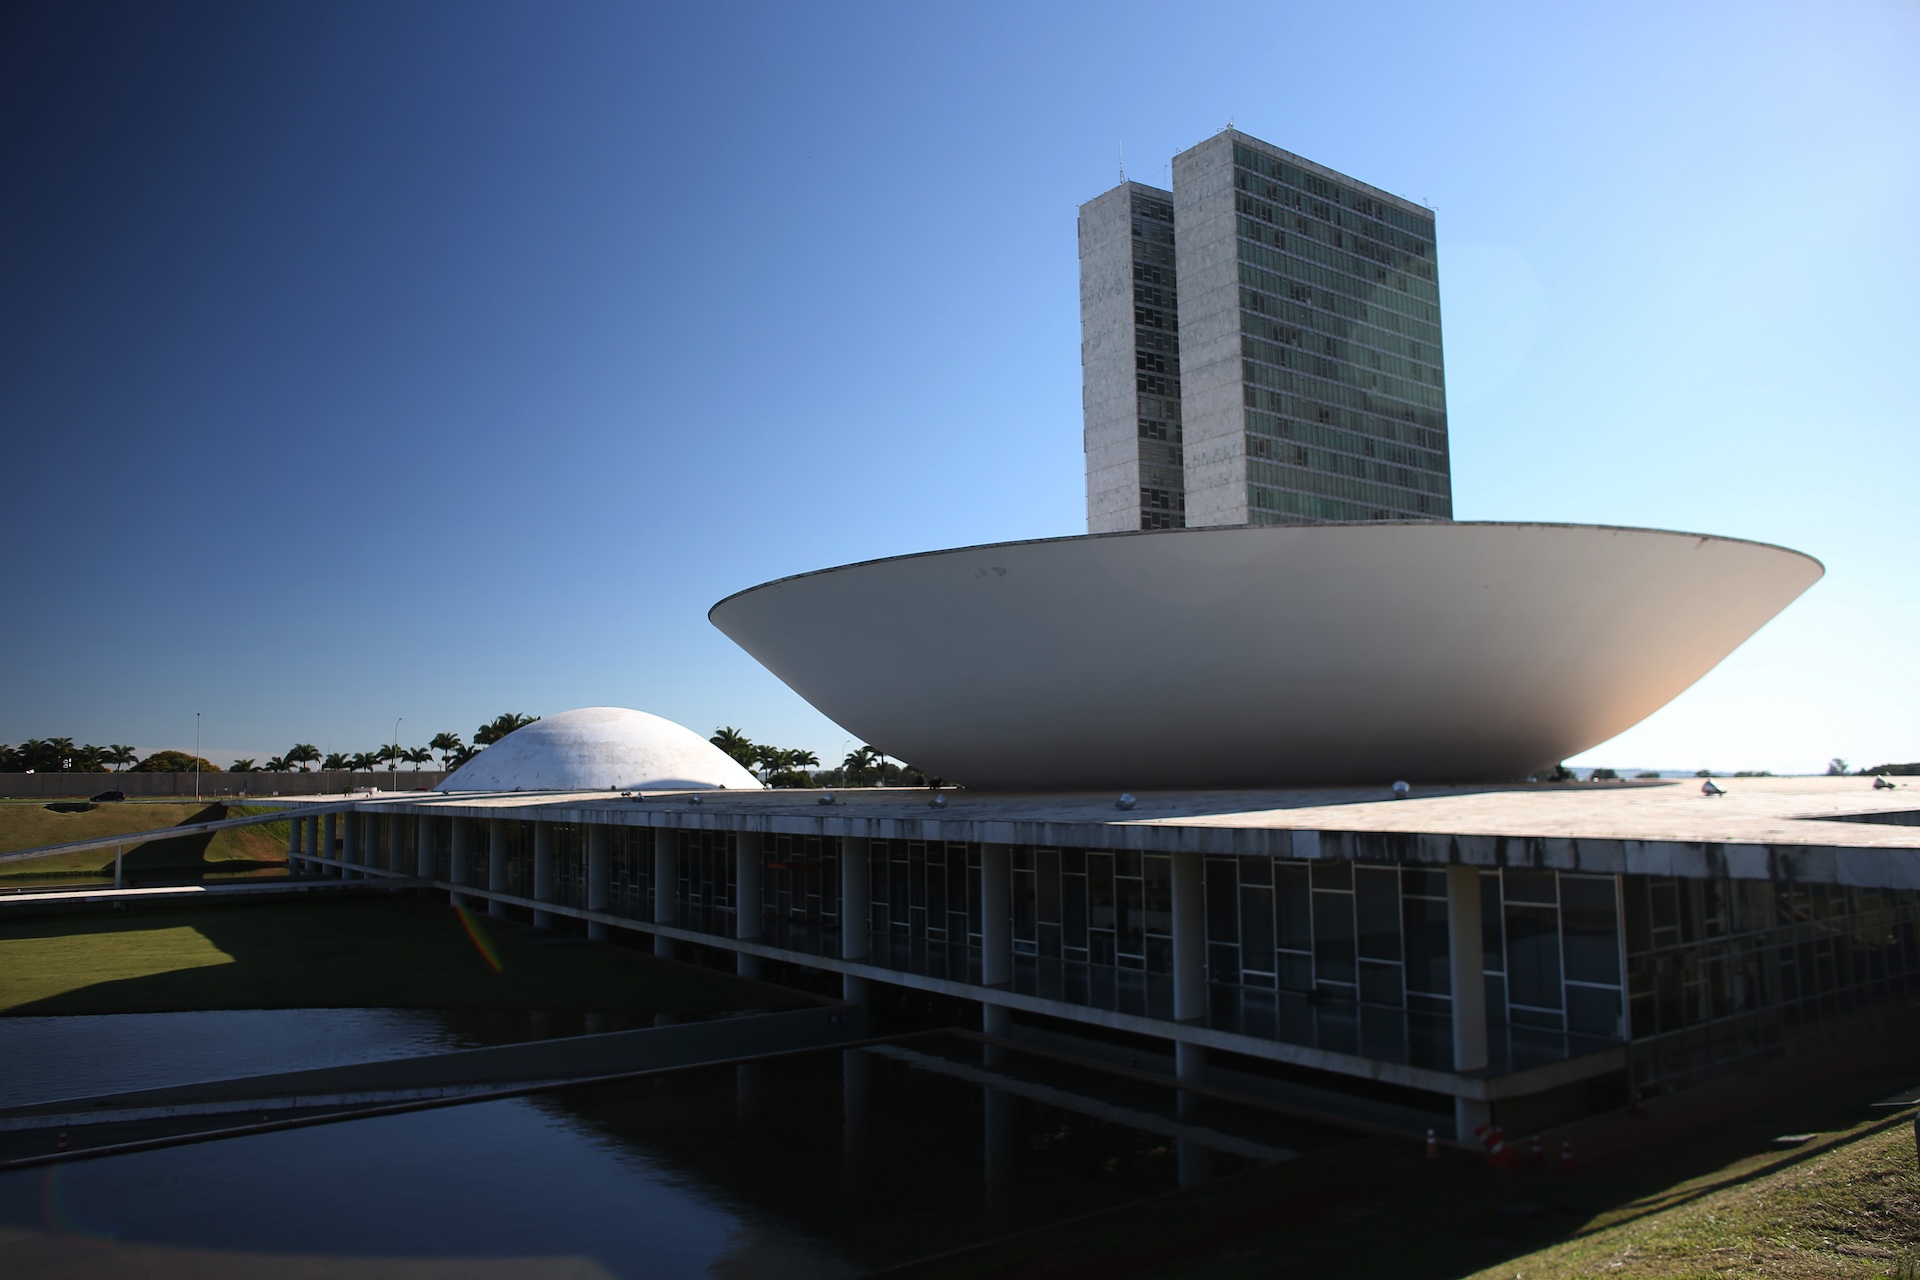 The National Congress building was designed by Oscar Niemeyer with structural design by engineer Joaquim Cardozo, and follows the style of modern Brazilian architecture. (Photo: Roberto Castro/MTur)